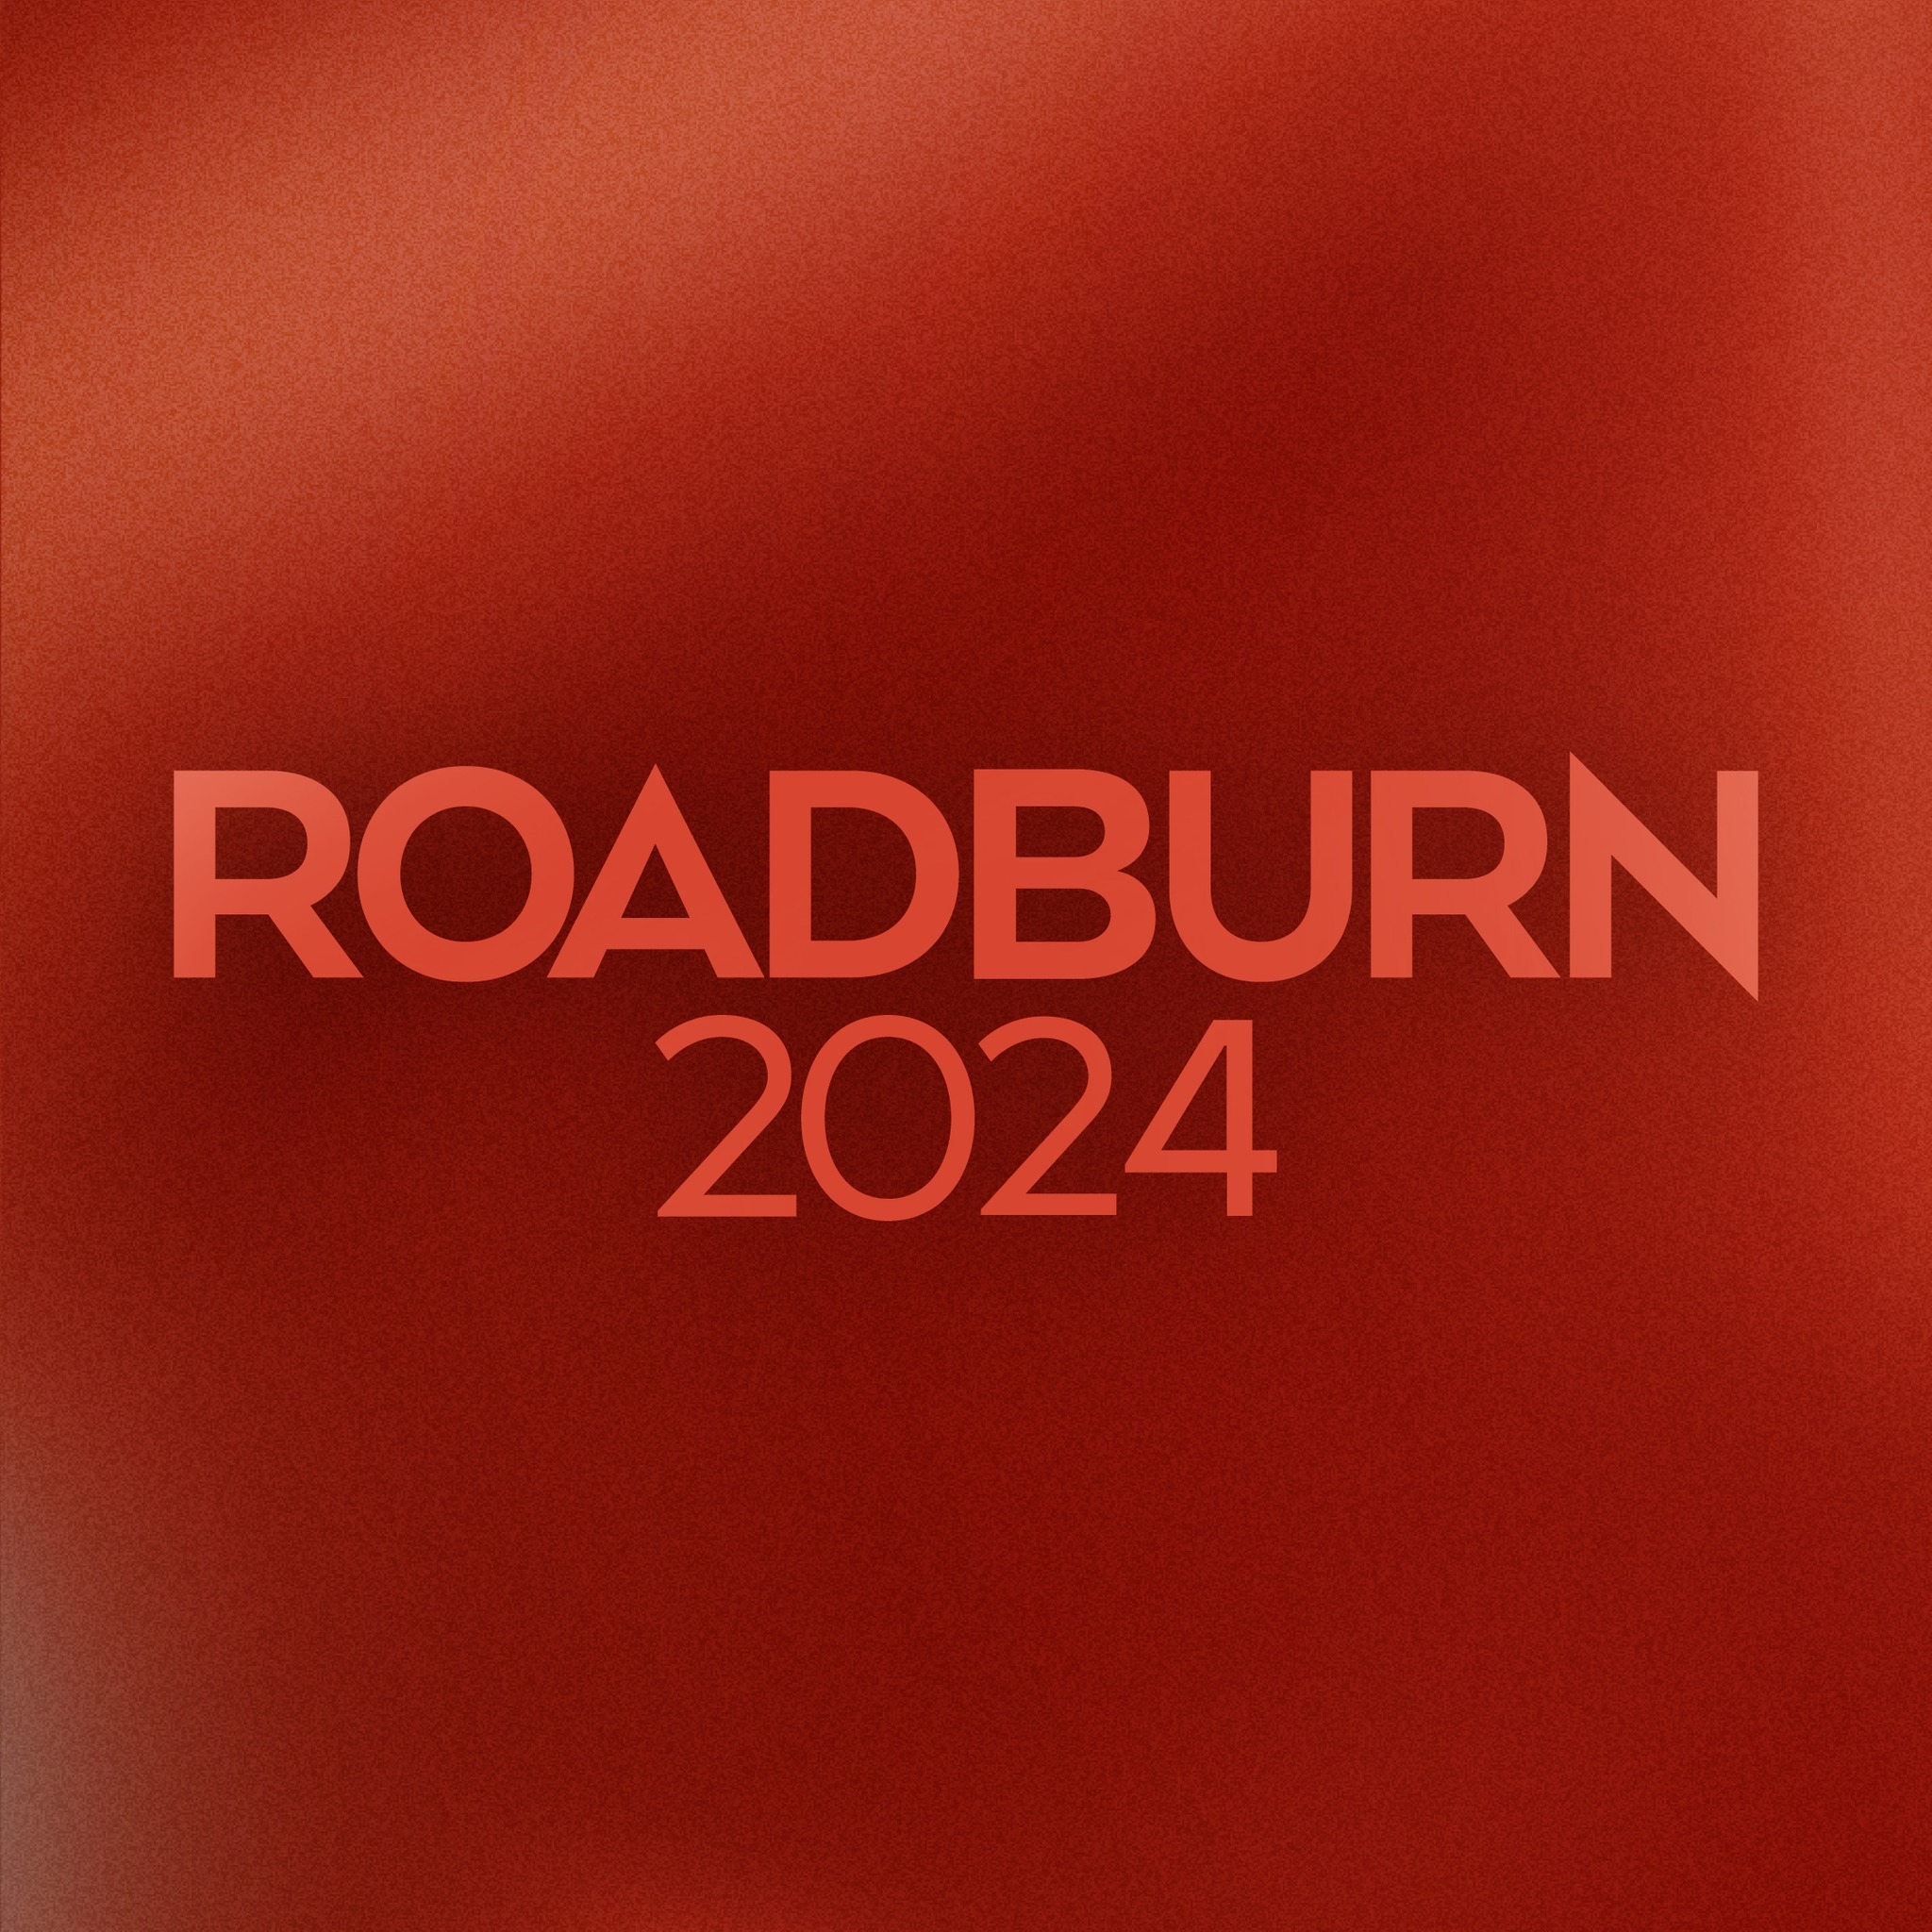 Roadburn adds over twenty new names to the 2024 lineup including Inter